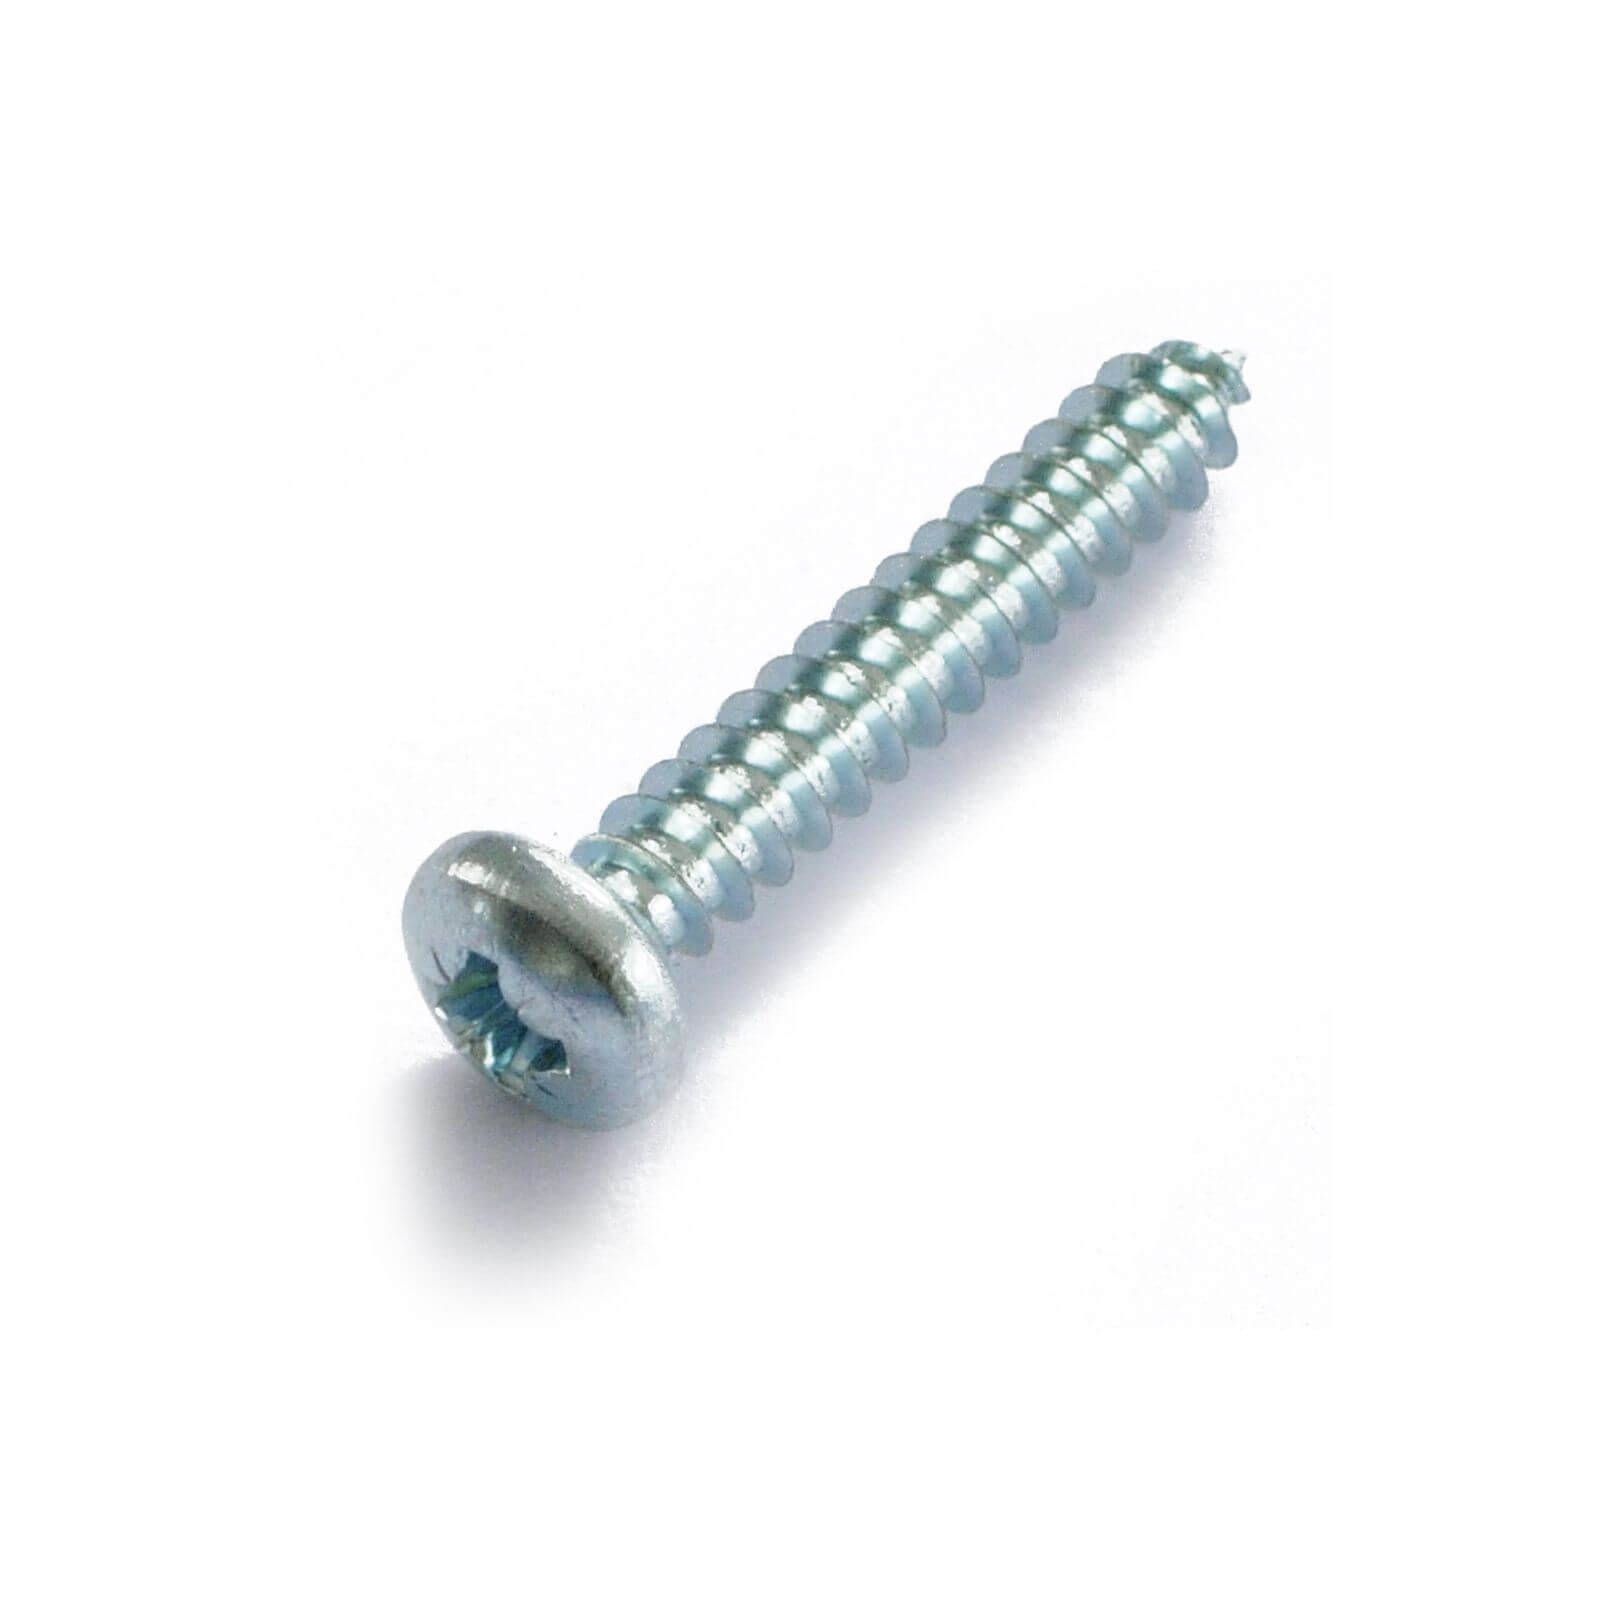 Self Tapping Screw - Bright Zinc Plated - 4 x 40mm - 10 Pack